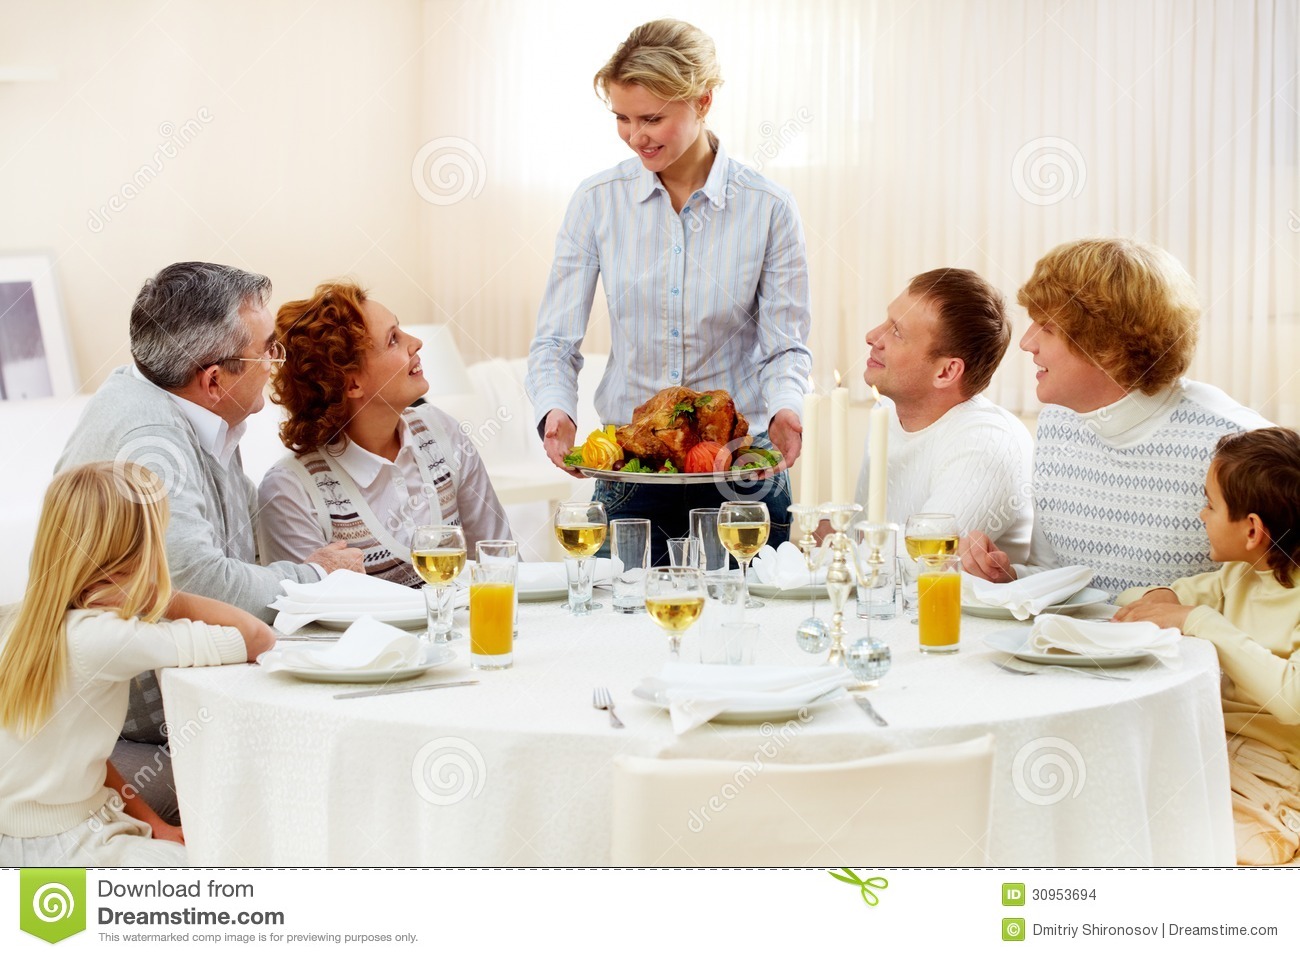 Portrait Of Big Family Sitting At Festive Table And Looking At Pretty